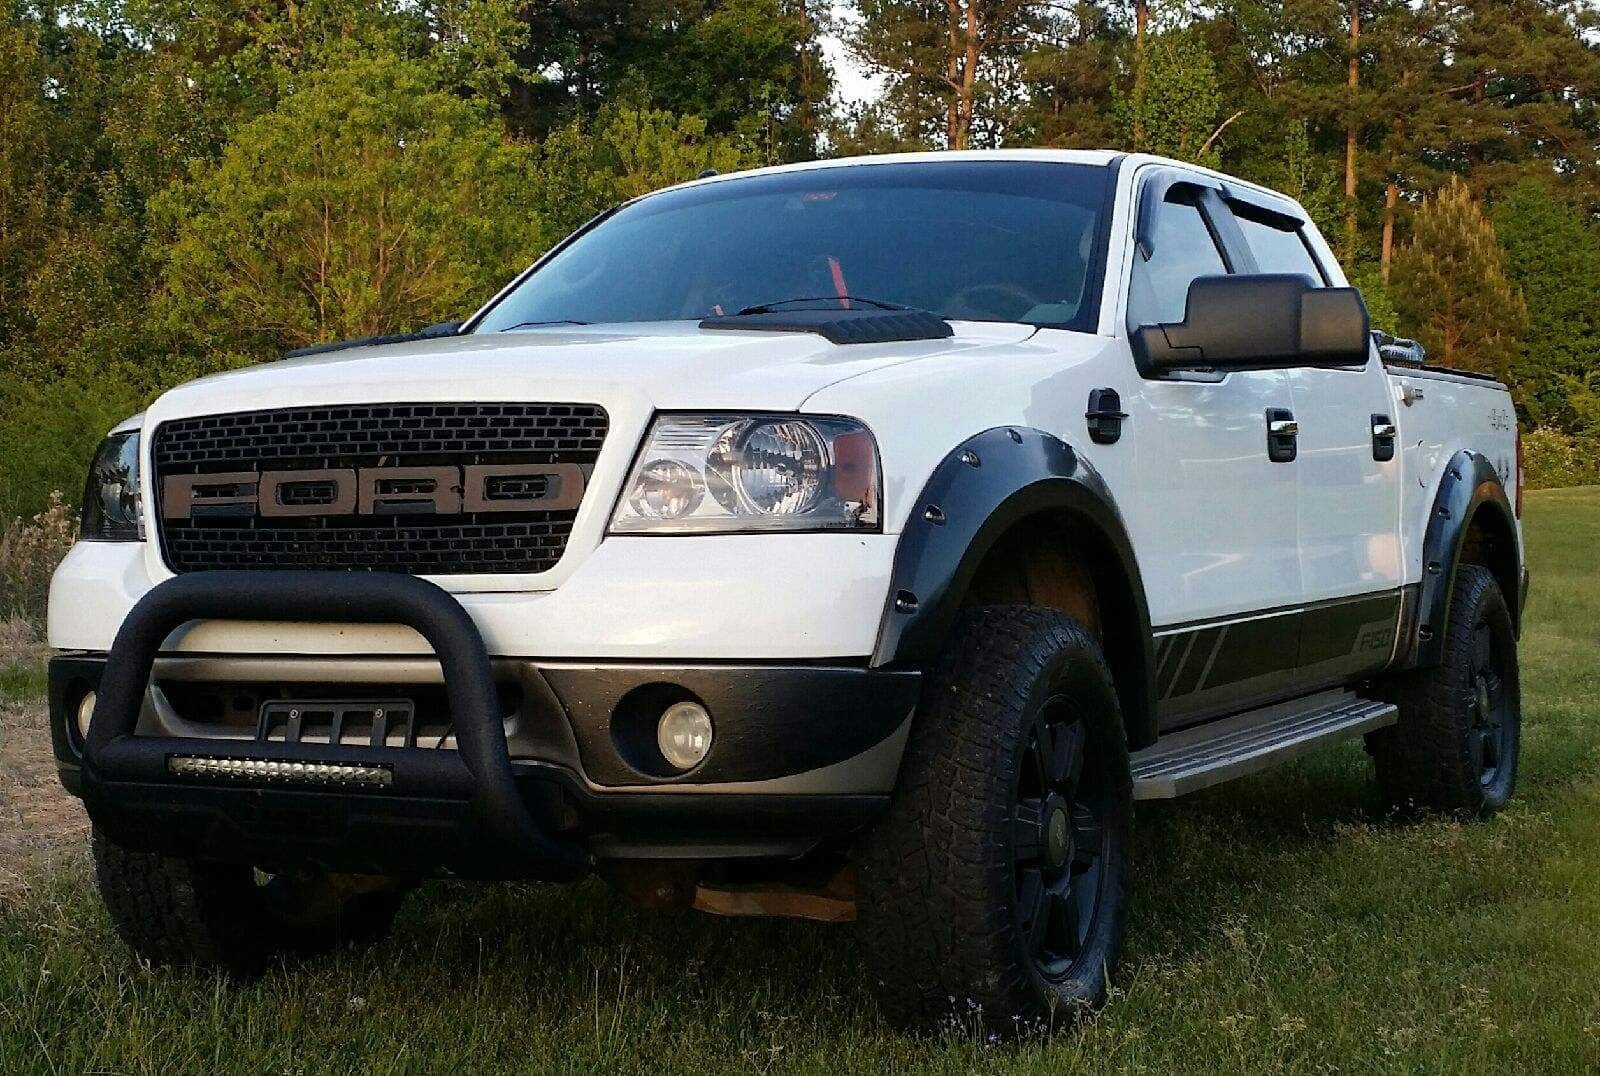 '04 - '08 Truck Picture Thread... - Page 2027 - Ford F150 Forum